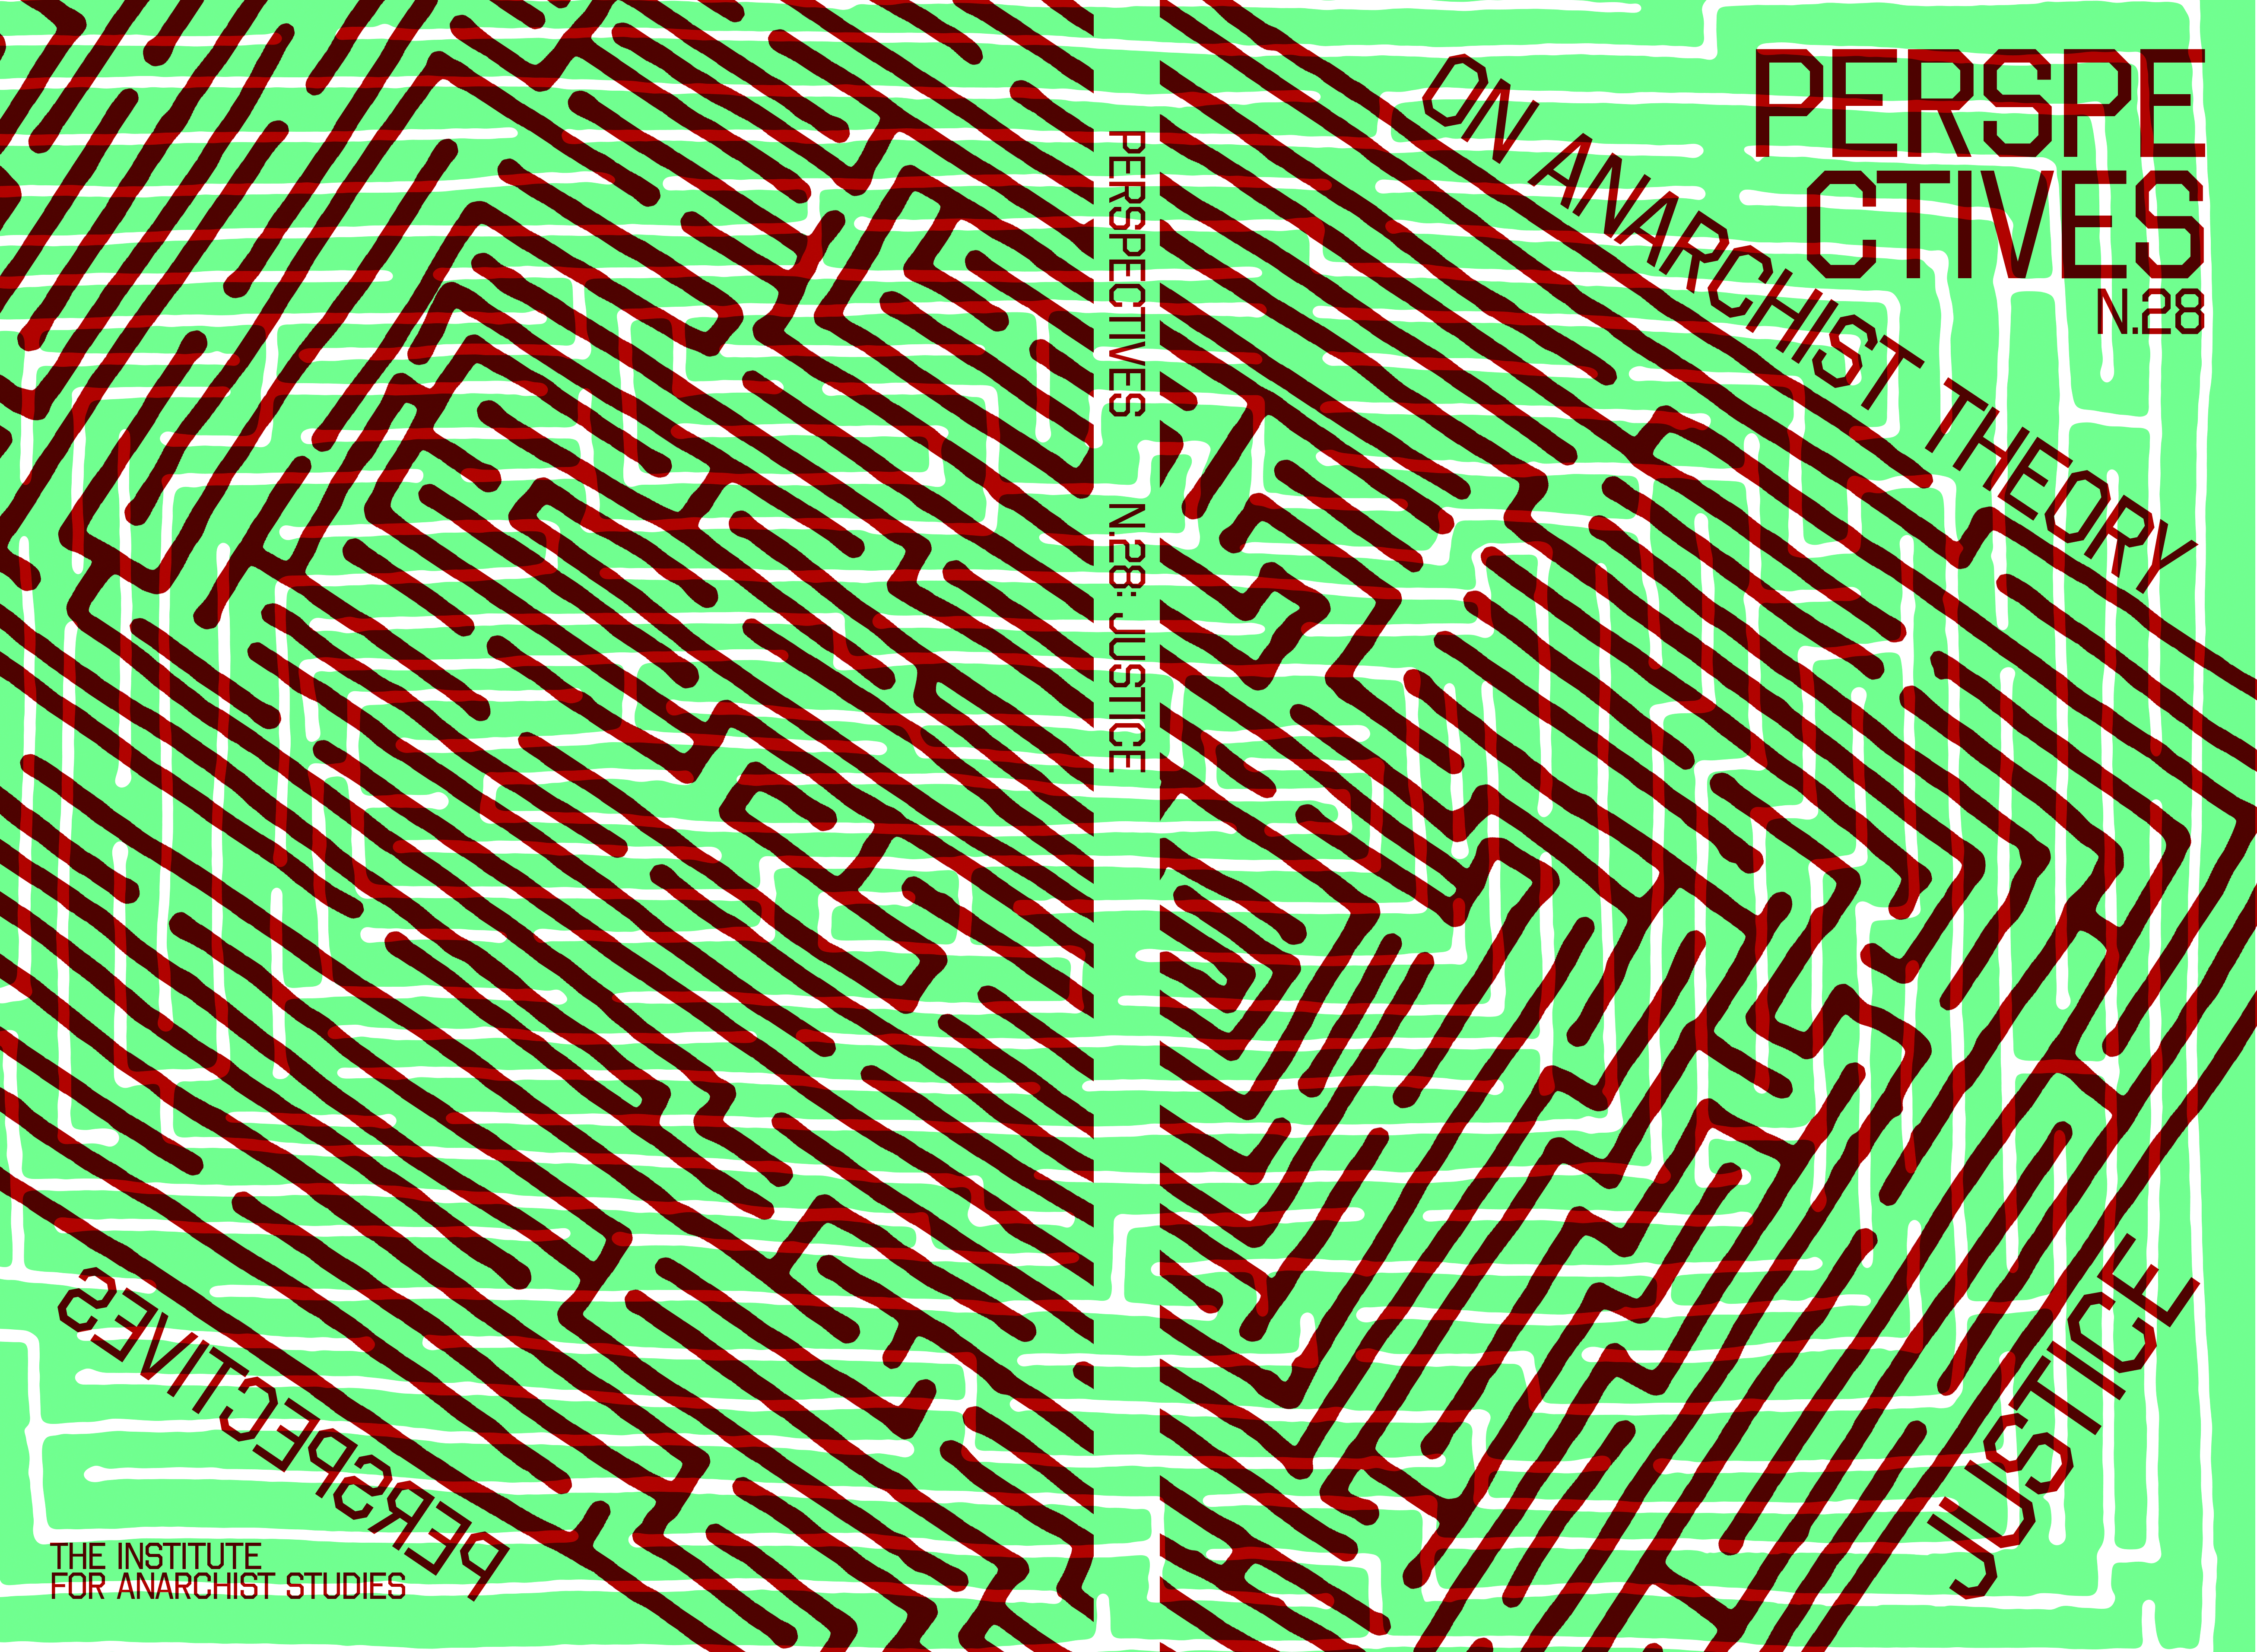 Persp28_cover_LAYERS.jpg